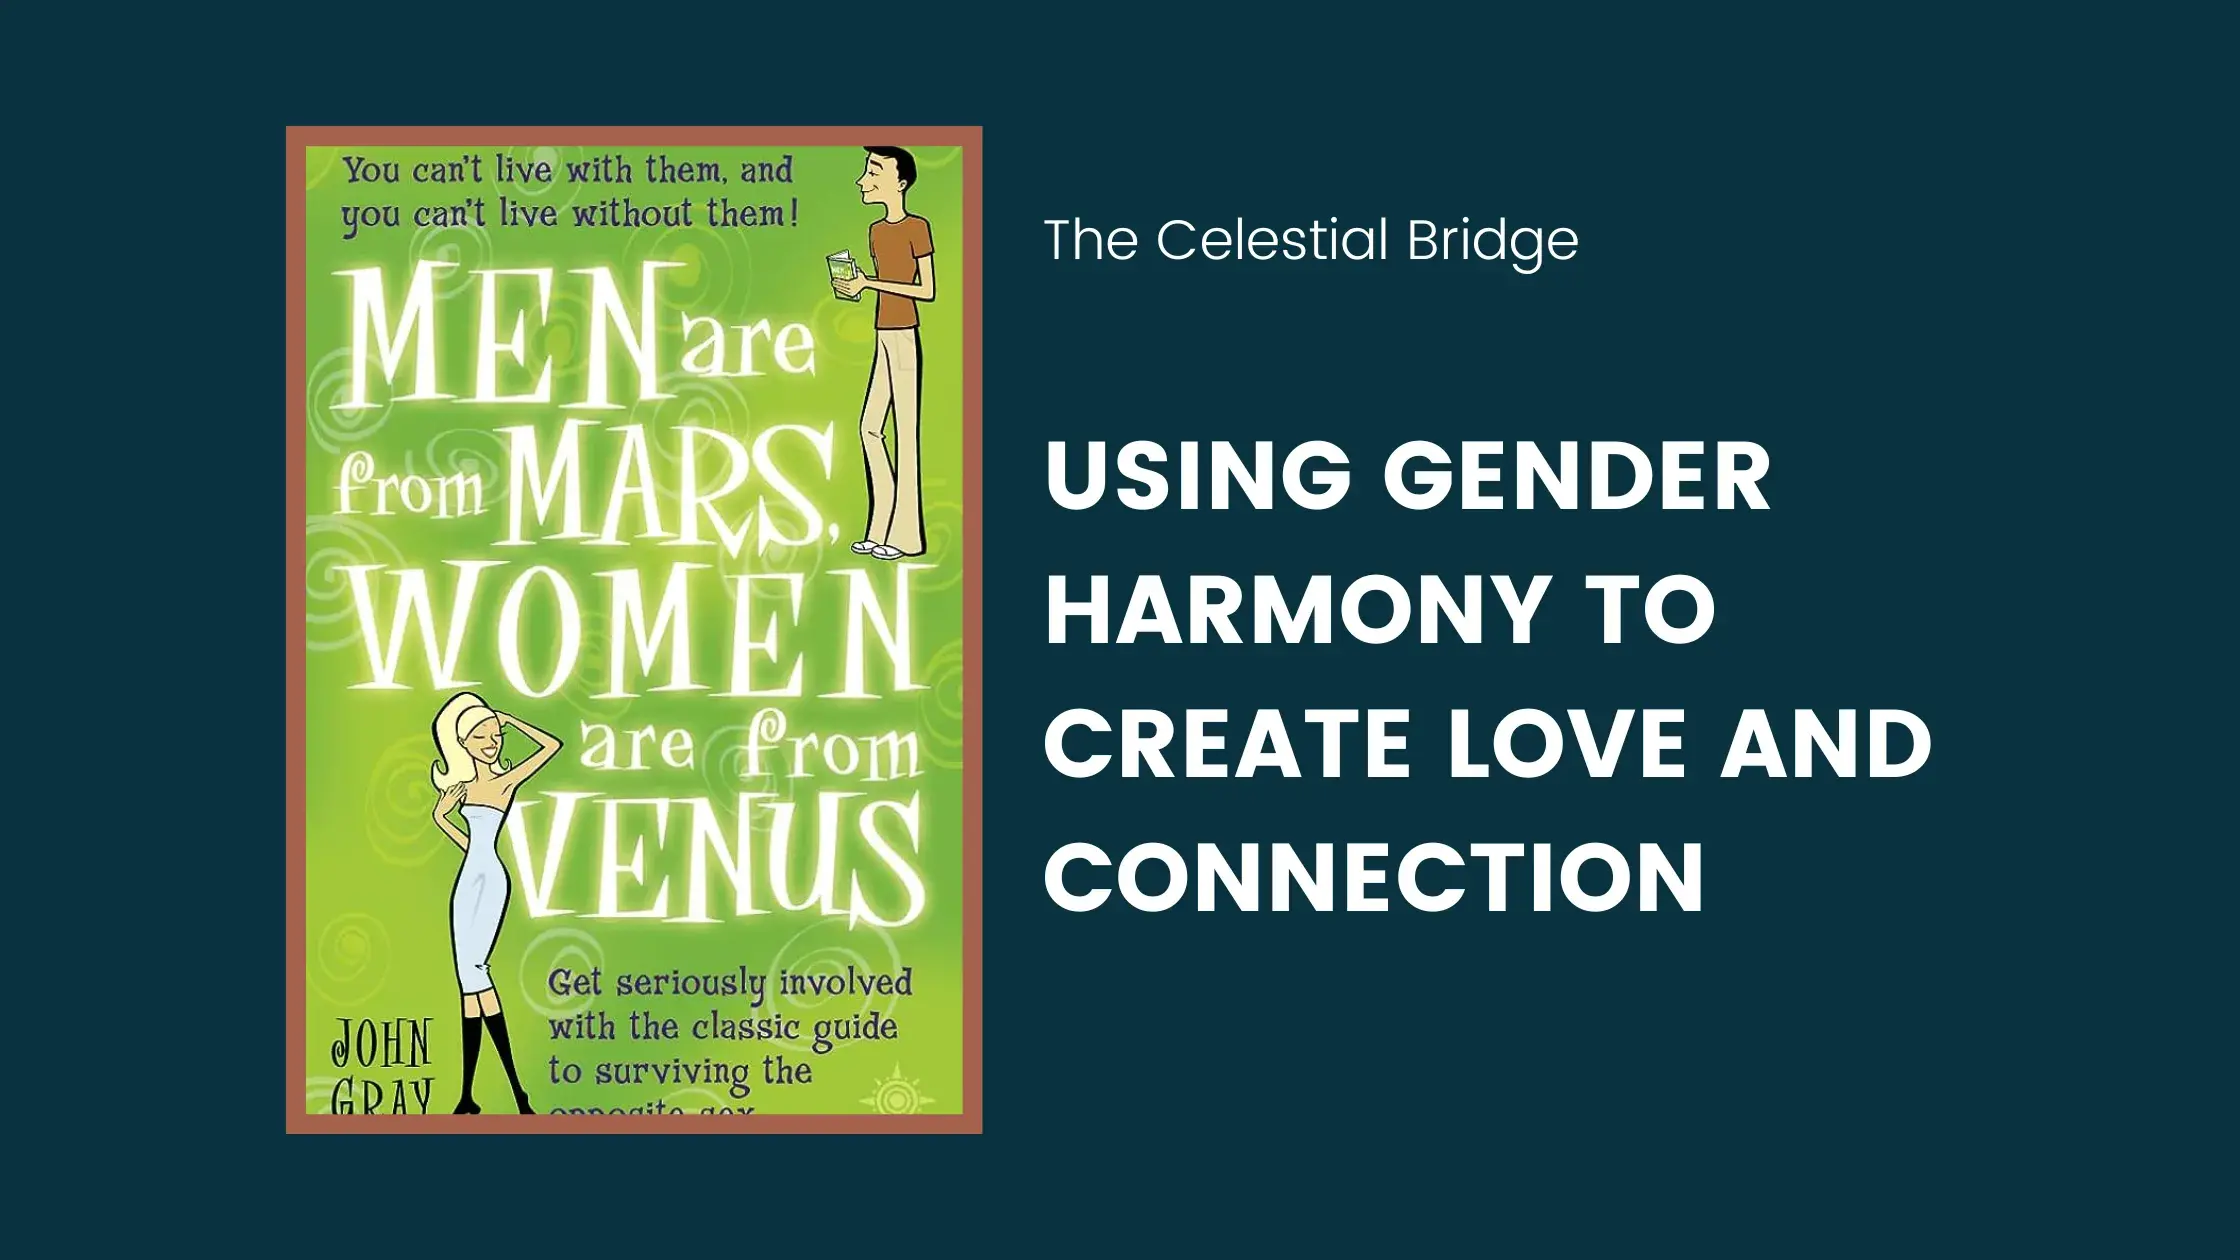 The Celestial Bridge: Using Gender Harmony to Create Love and Connection